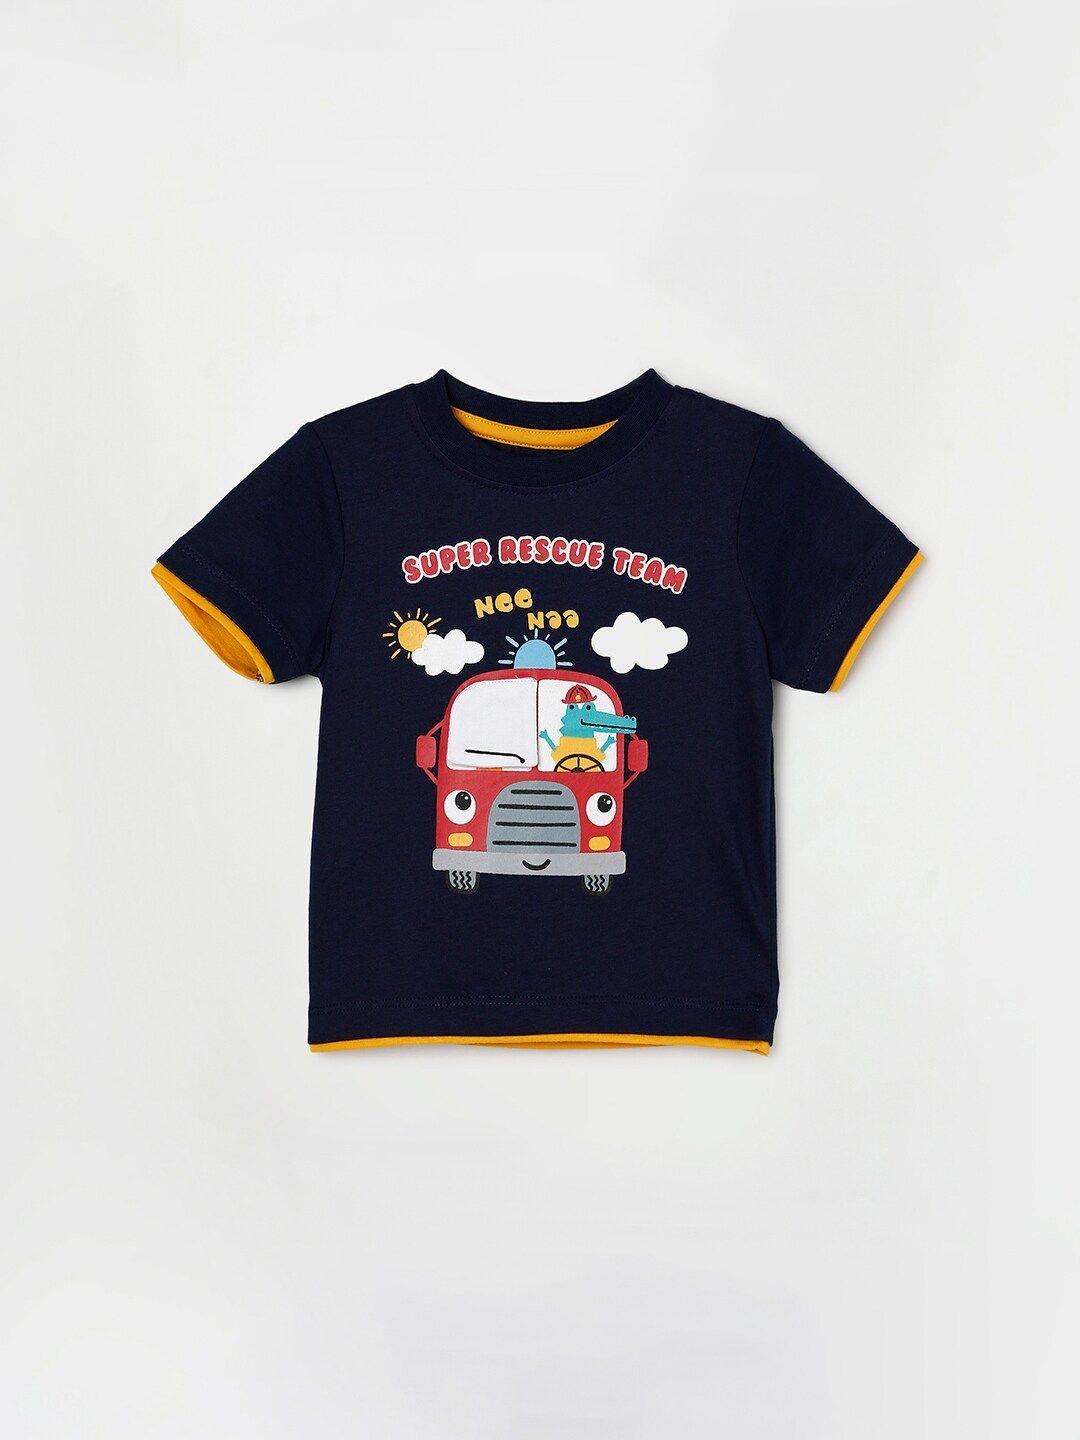 Juniors by Lifestyle Boys Navy Blue Printed Cotton T-shirt